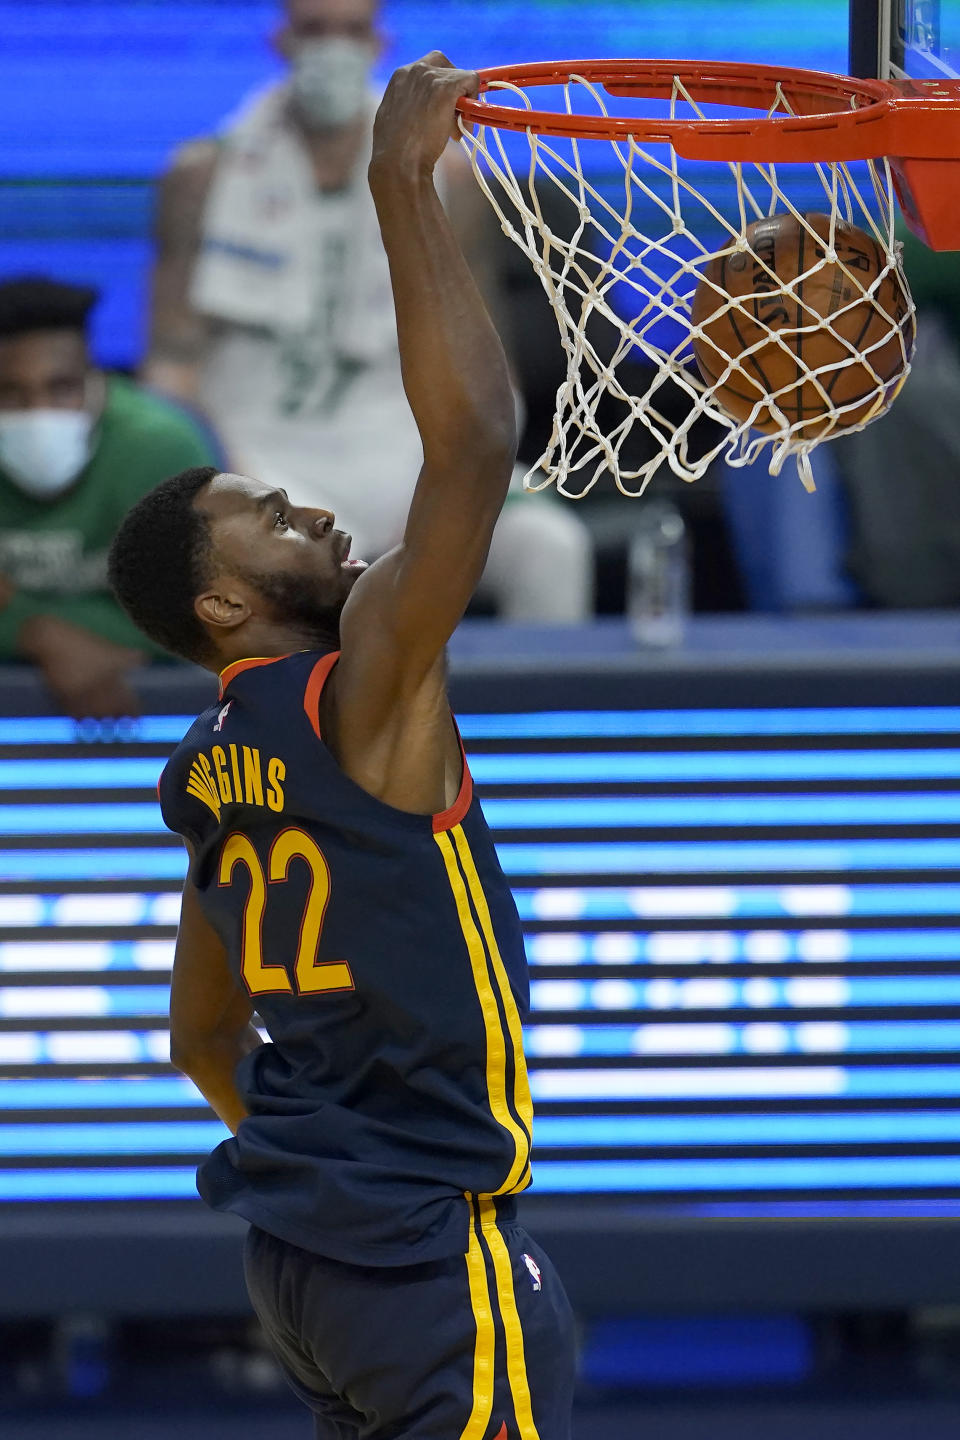 Golden State Warriors forward Andrew Wiggins dunks against the Boston Celtics during the first half of an NBA basketball game in San Francisco, Tuesday, Feb. 2, 2021. (AP Photo/Jeff Chiu)